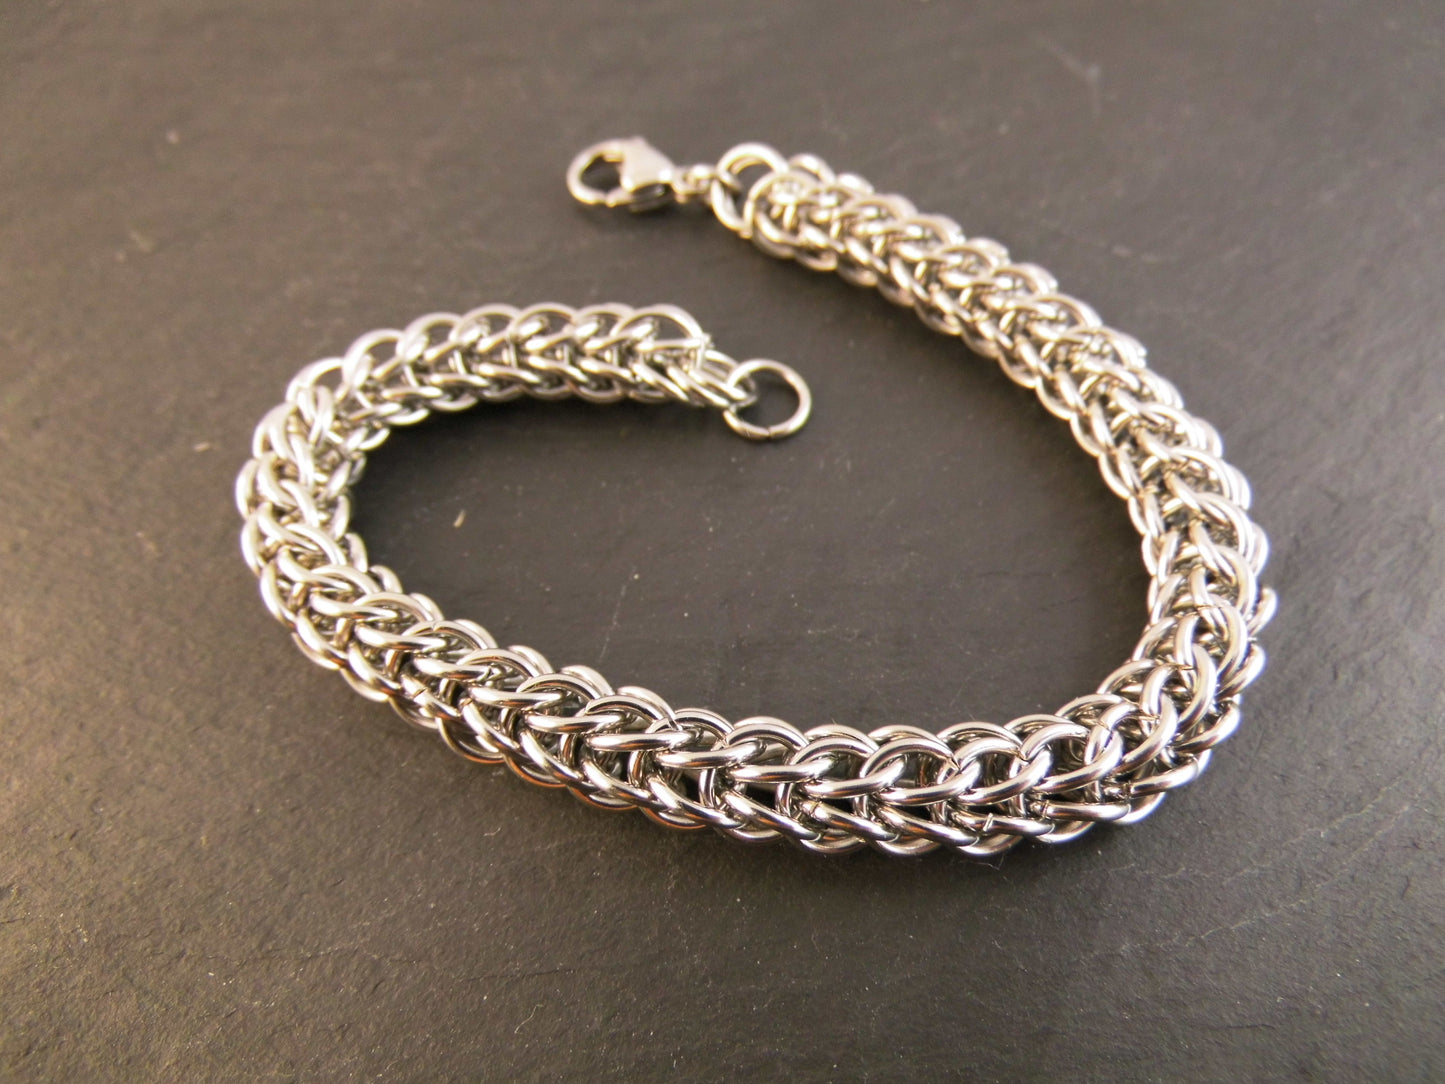 Edelstahl Armband Chainmail Full Persian 6 in 1 Style